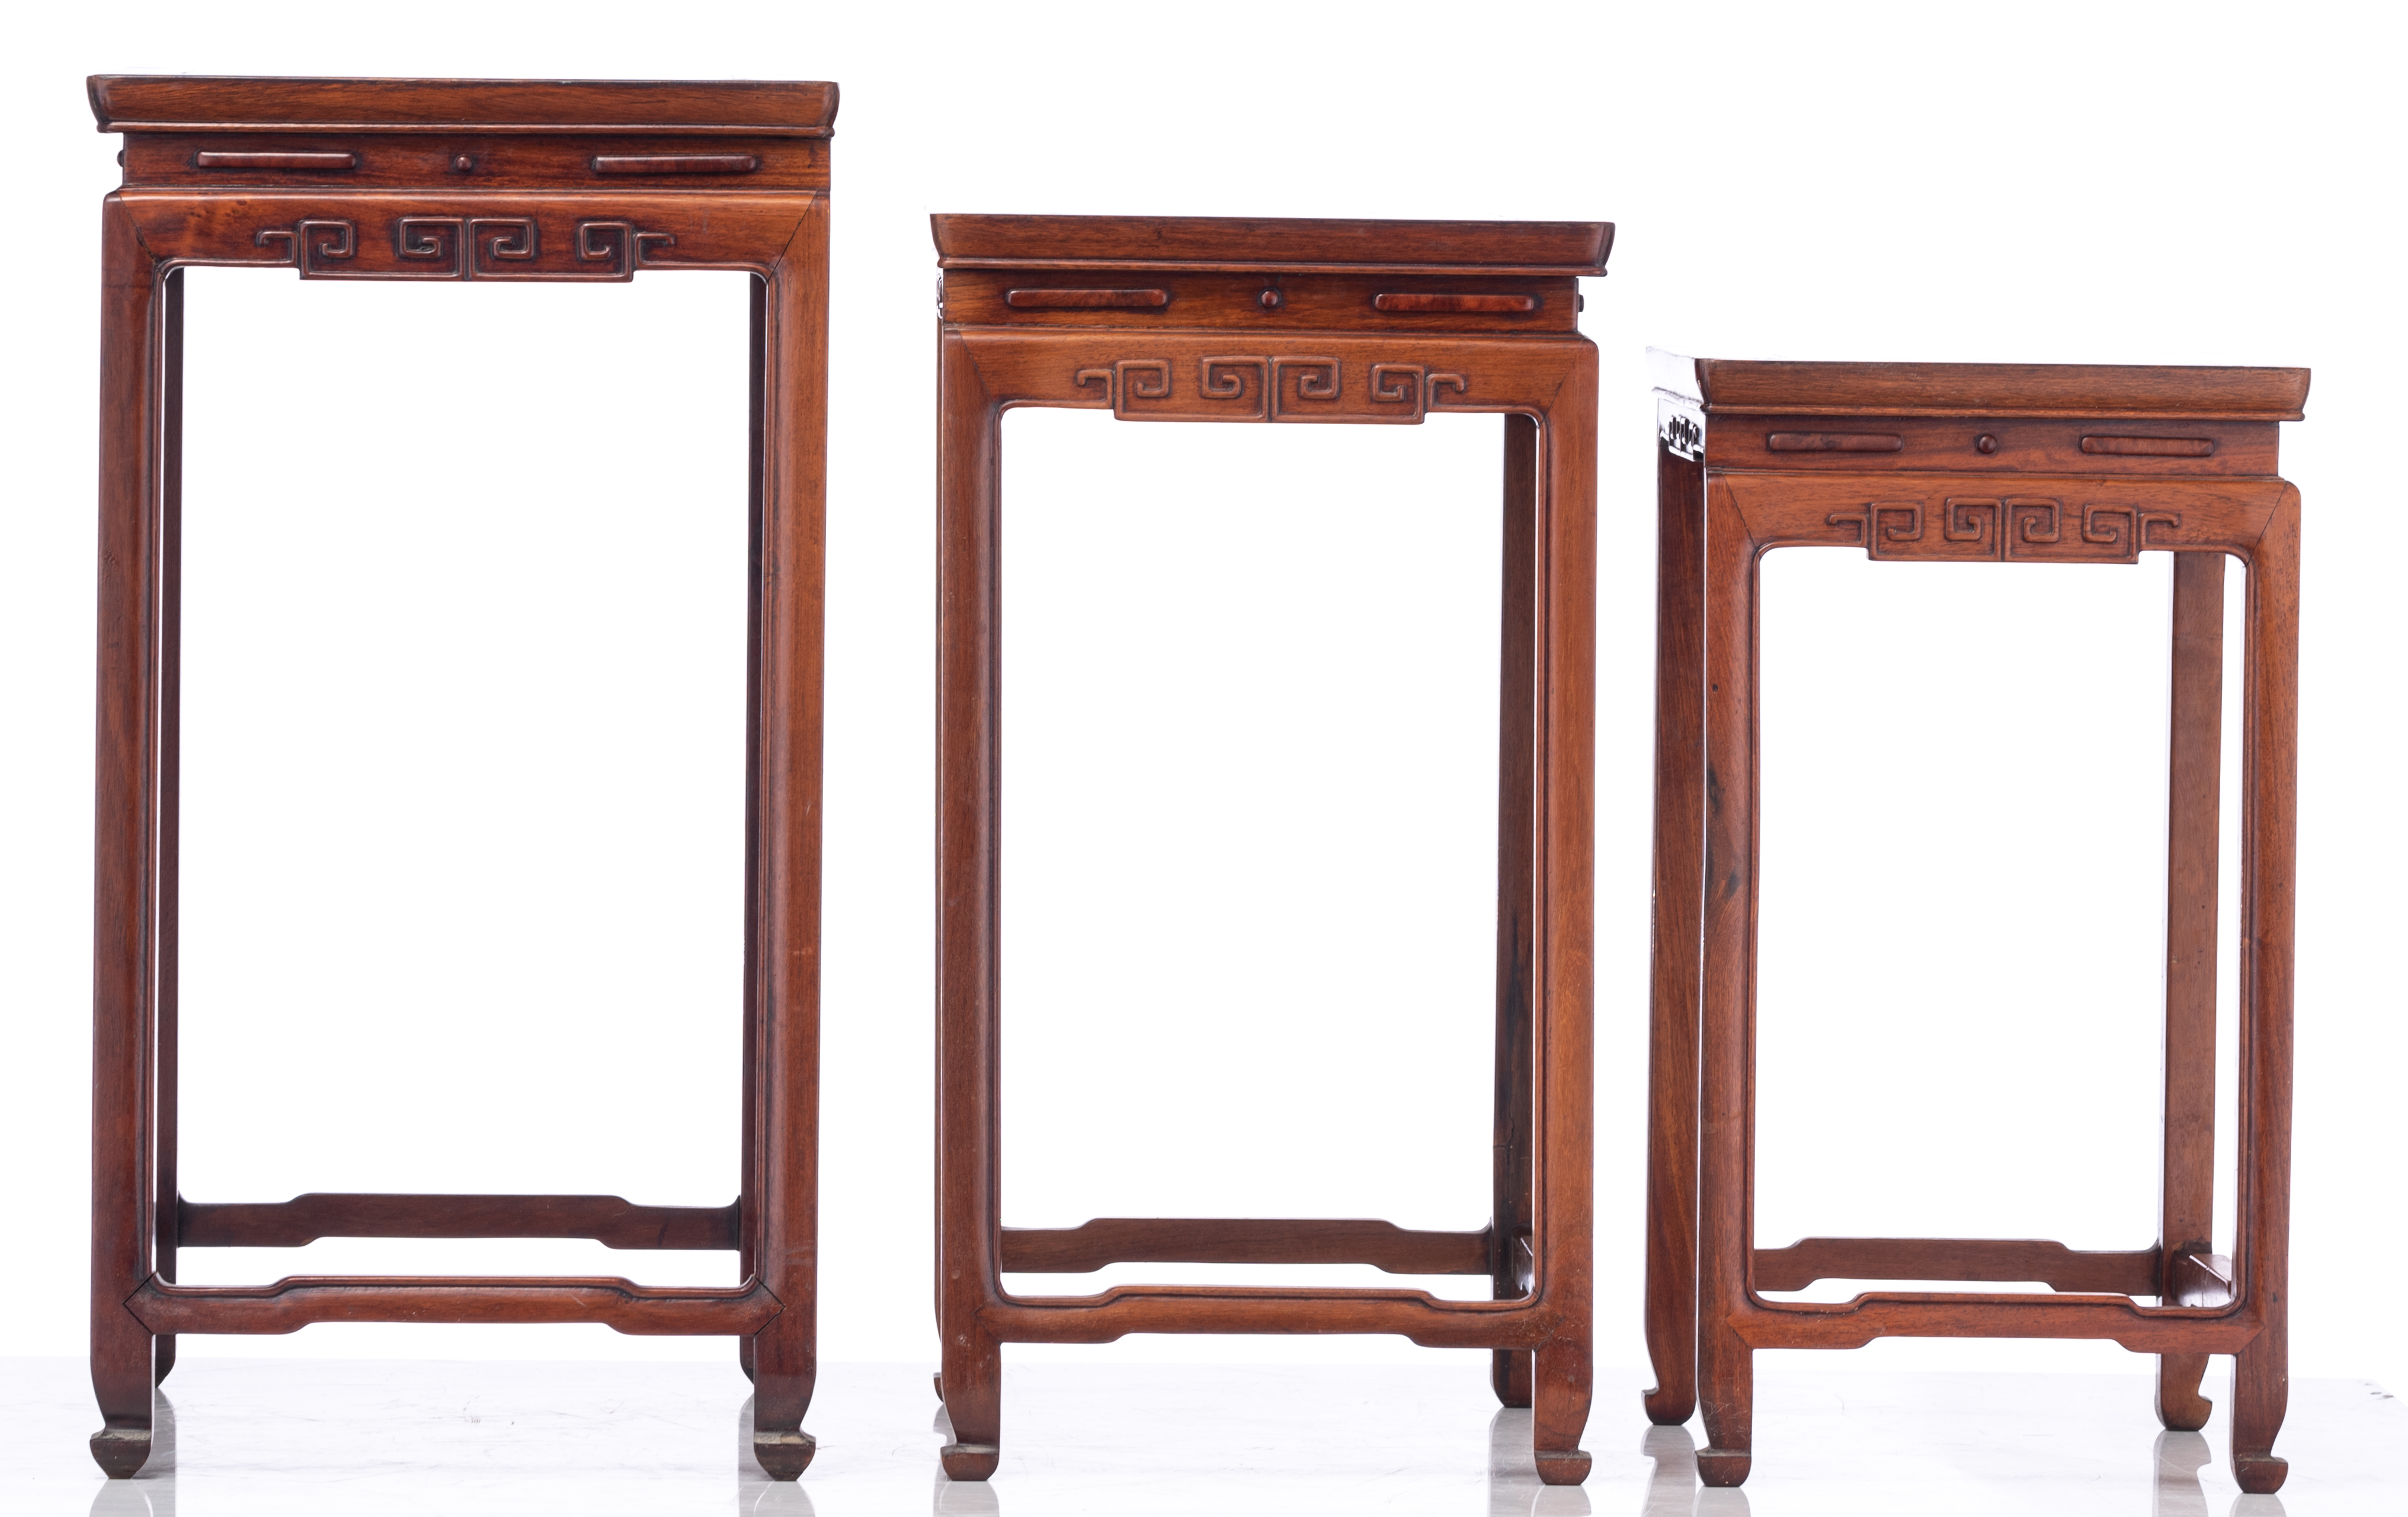 A set of three Chinese nesting tables, H 53,5 - 66,5 cm - Image 3 of 7